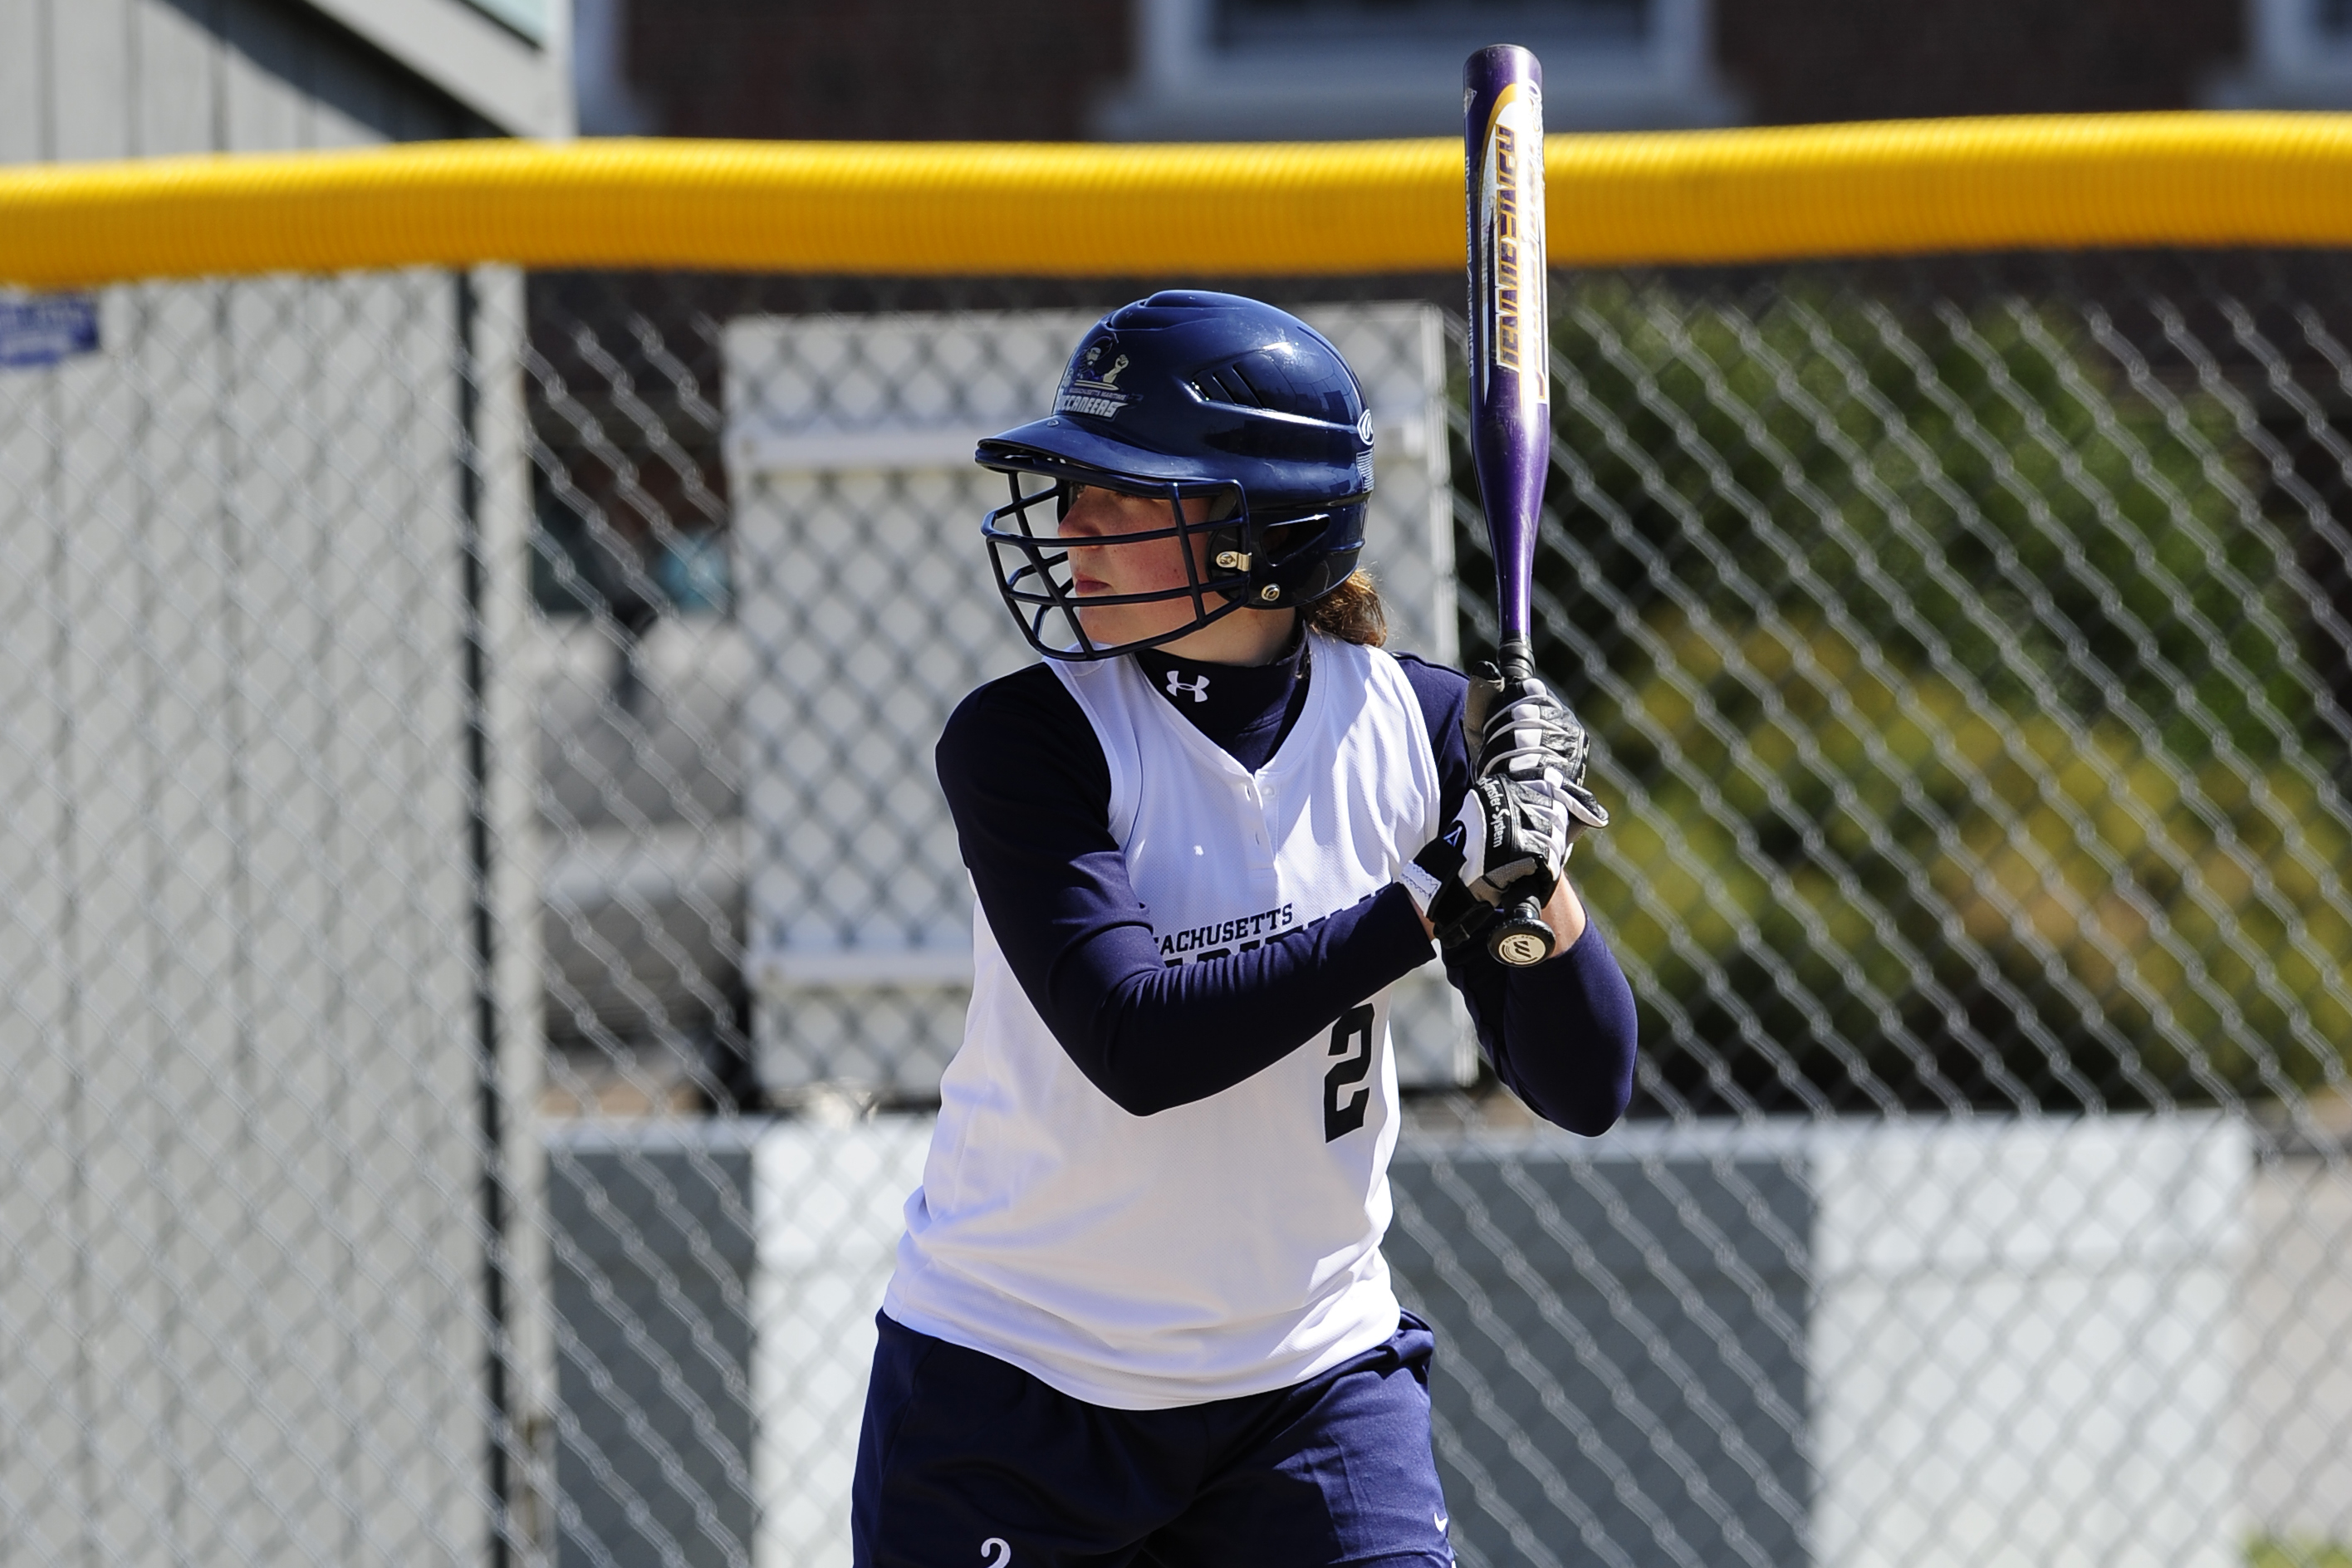 Thibeault Raps Out Pair Of Singles, McLaughlin Belts Triple As Softball Drops 13-0, 11-0 MASCAC Twinbill Decisions To Framingham State